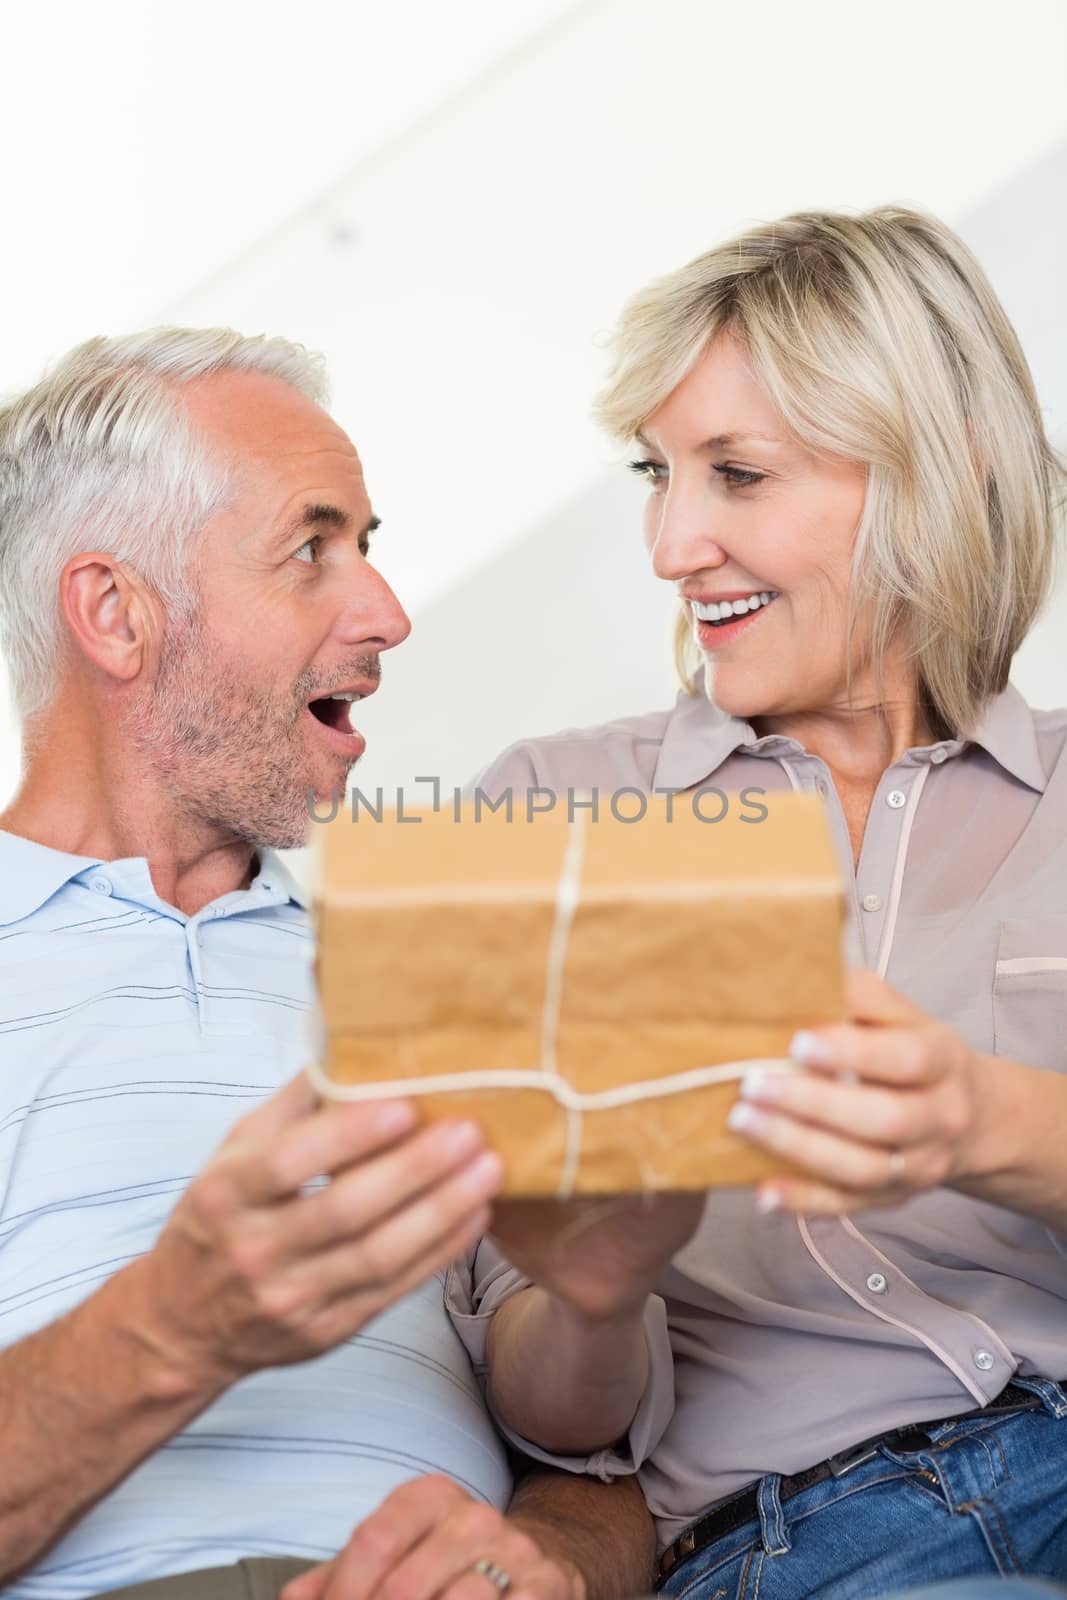 Portrait of a smiling woman surprising mature man with a gift on sofa at home